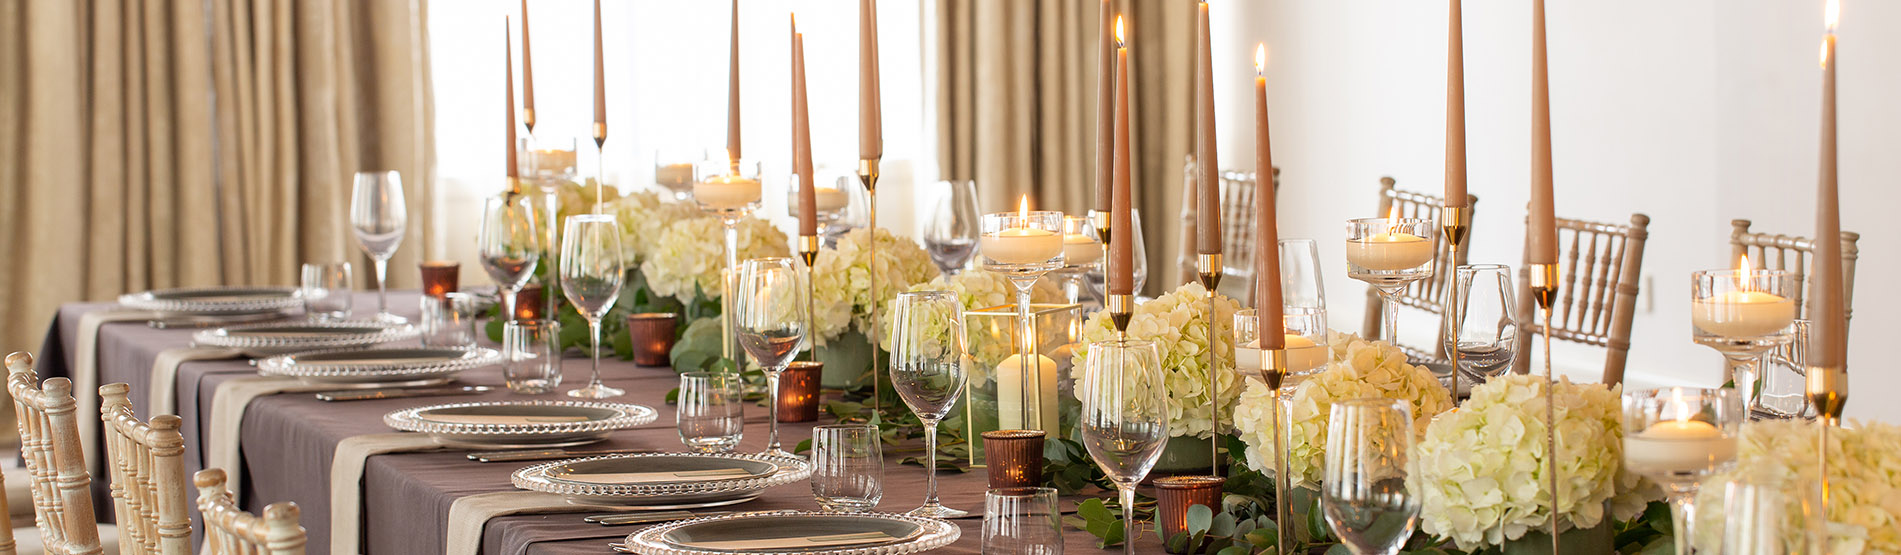 Long table beautifully decorated with white hydrangeas and candles